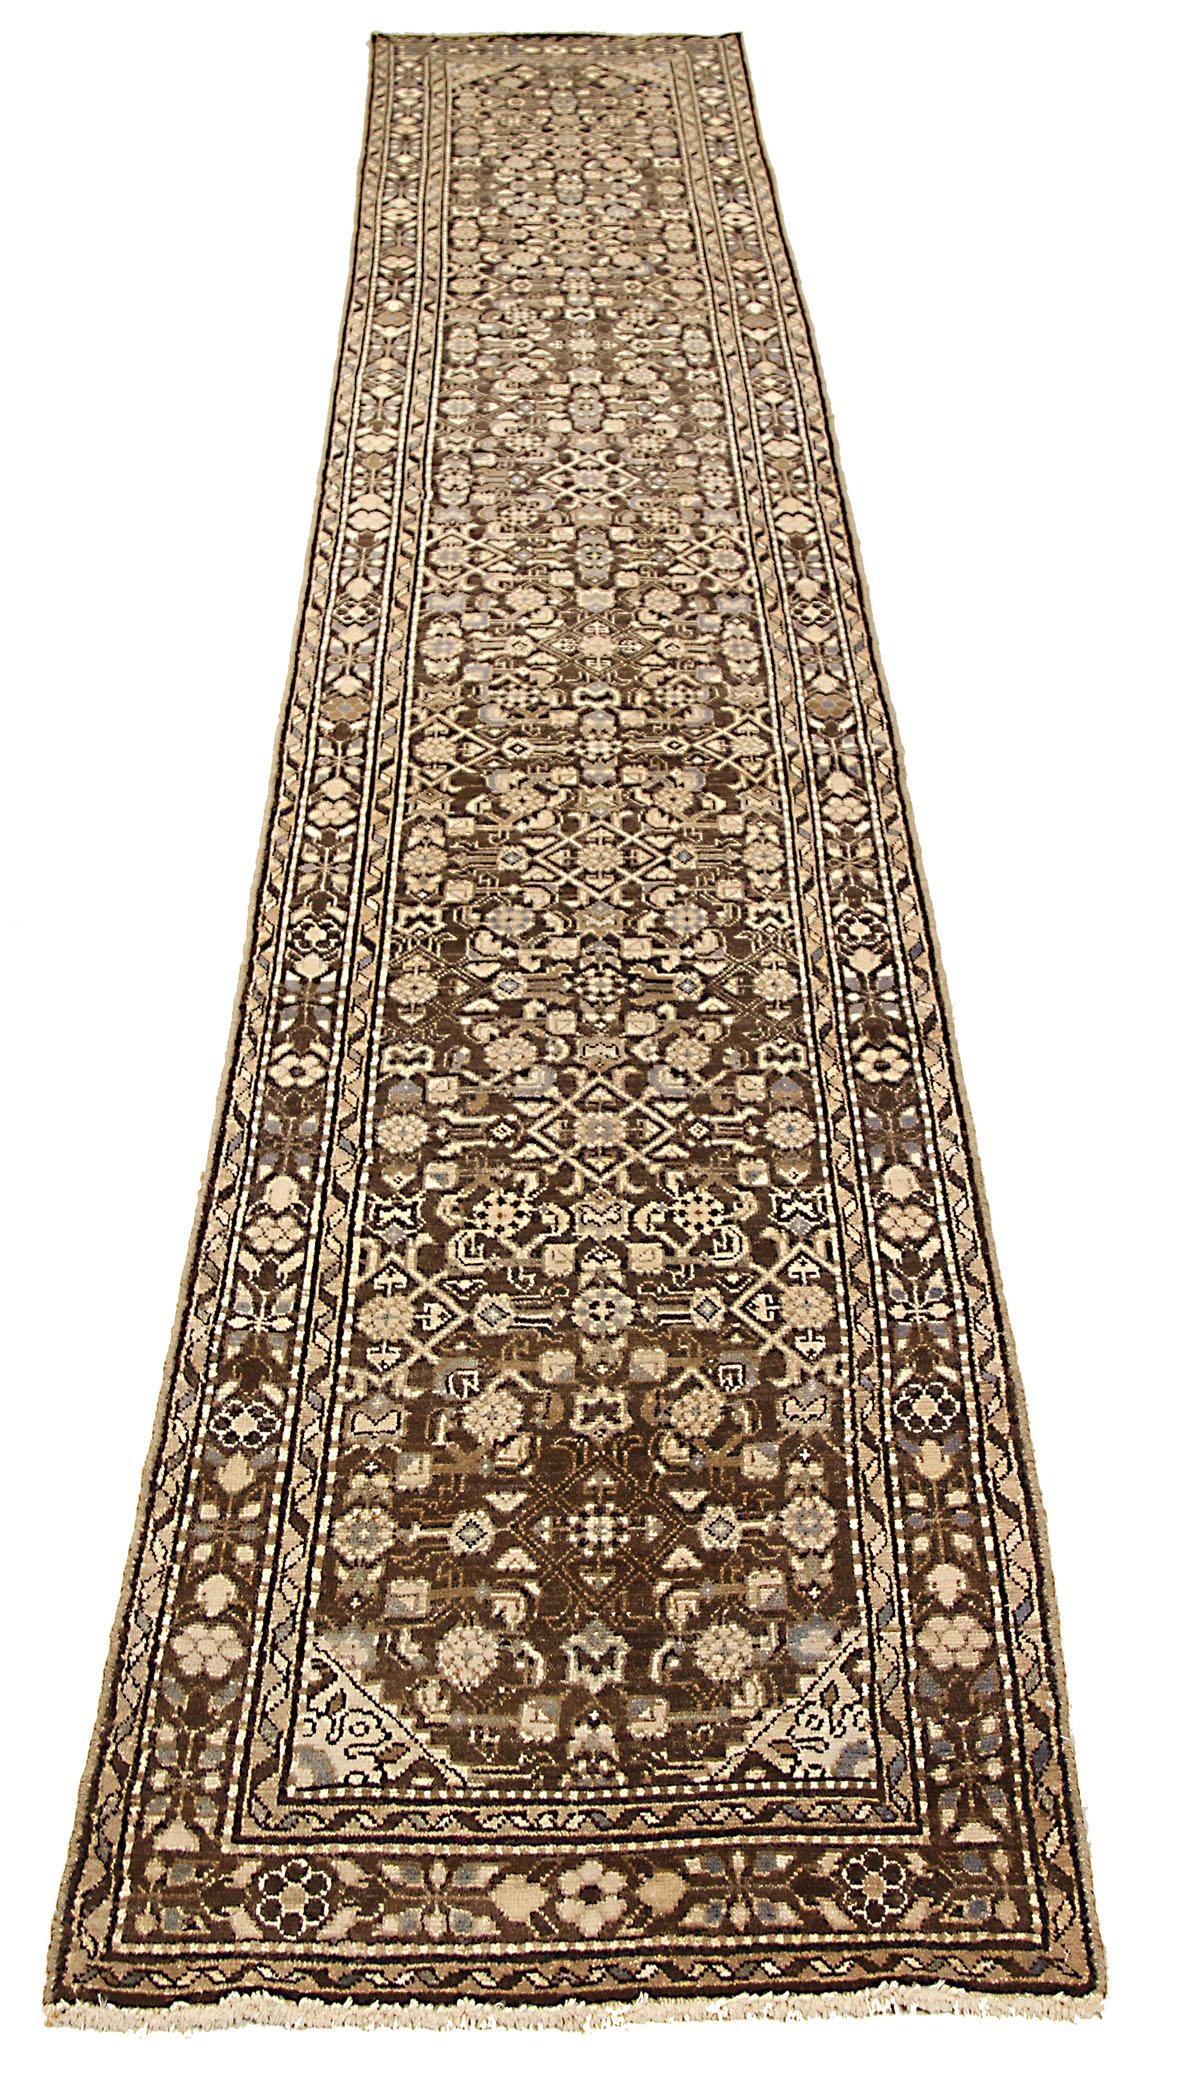 Antique Persian runner rug handwoven from the finest sheep’s wool and colored with all-natural vegetable dyes that are safe for humans and pets. It’s a traditional Malayer design featuring black and beige floral medallions over a rich brown field.